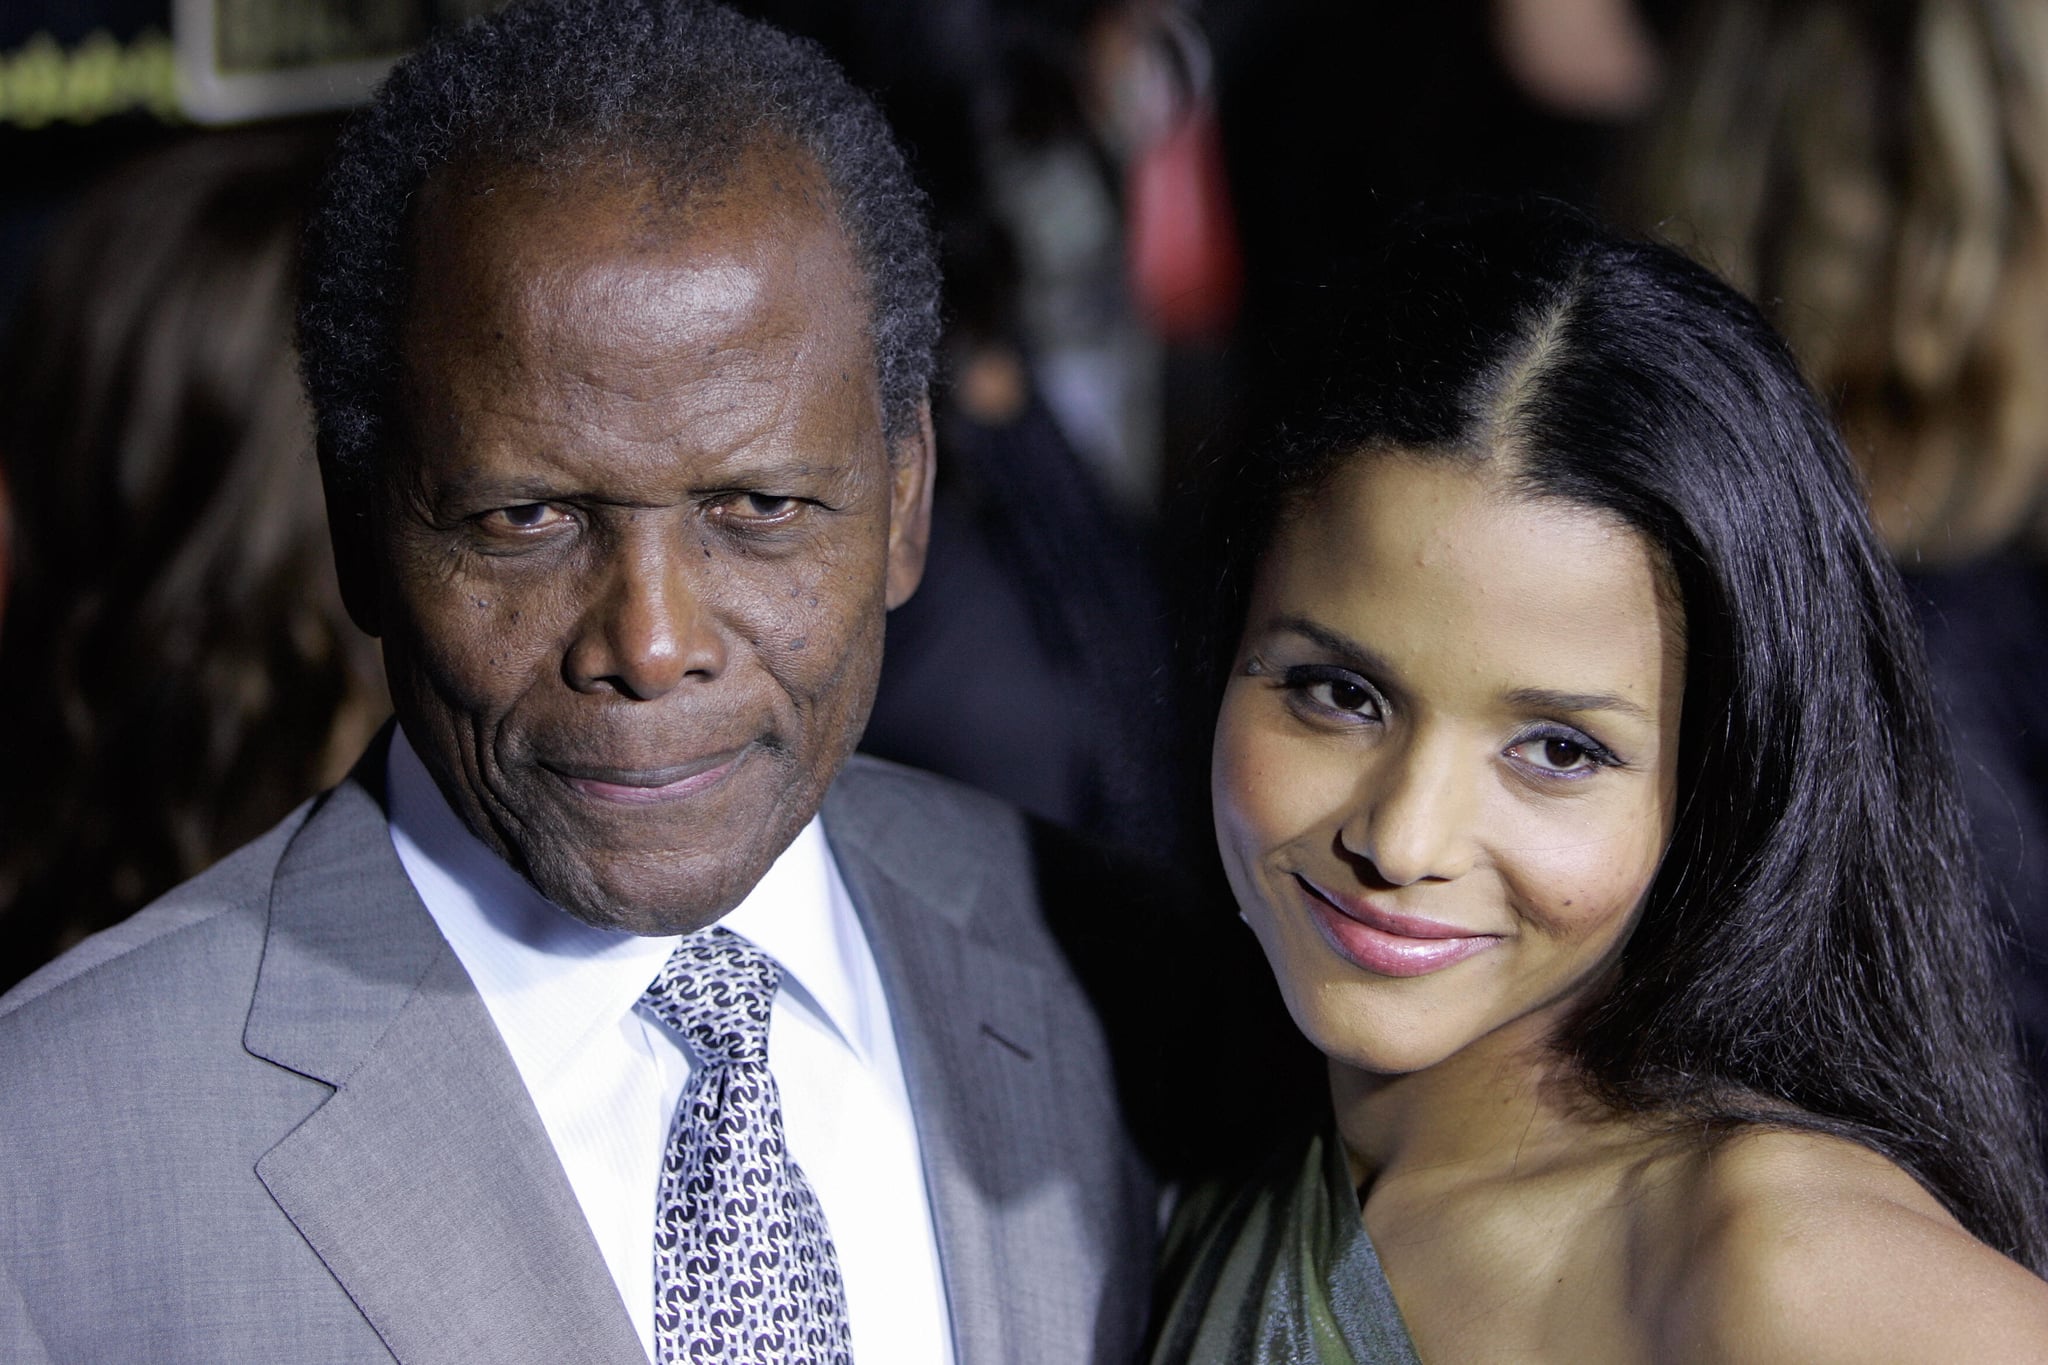 Los Angeles, UNITED STATES: Actor Sidney Poitier and his daughter Sydney Tamiia Poitier arrive for the premiere of 